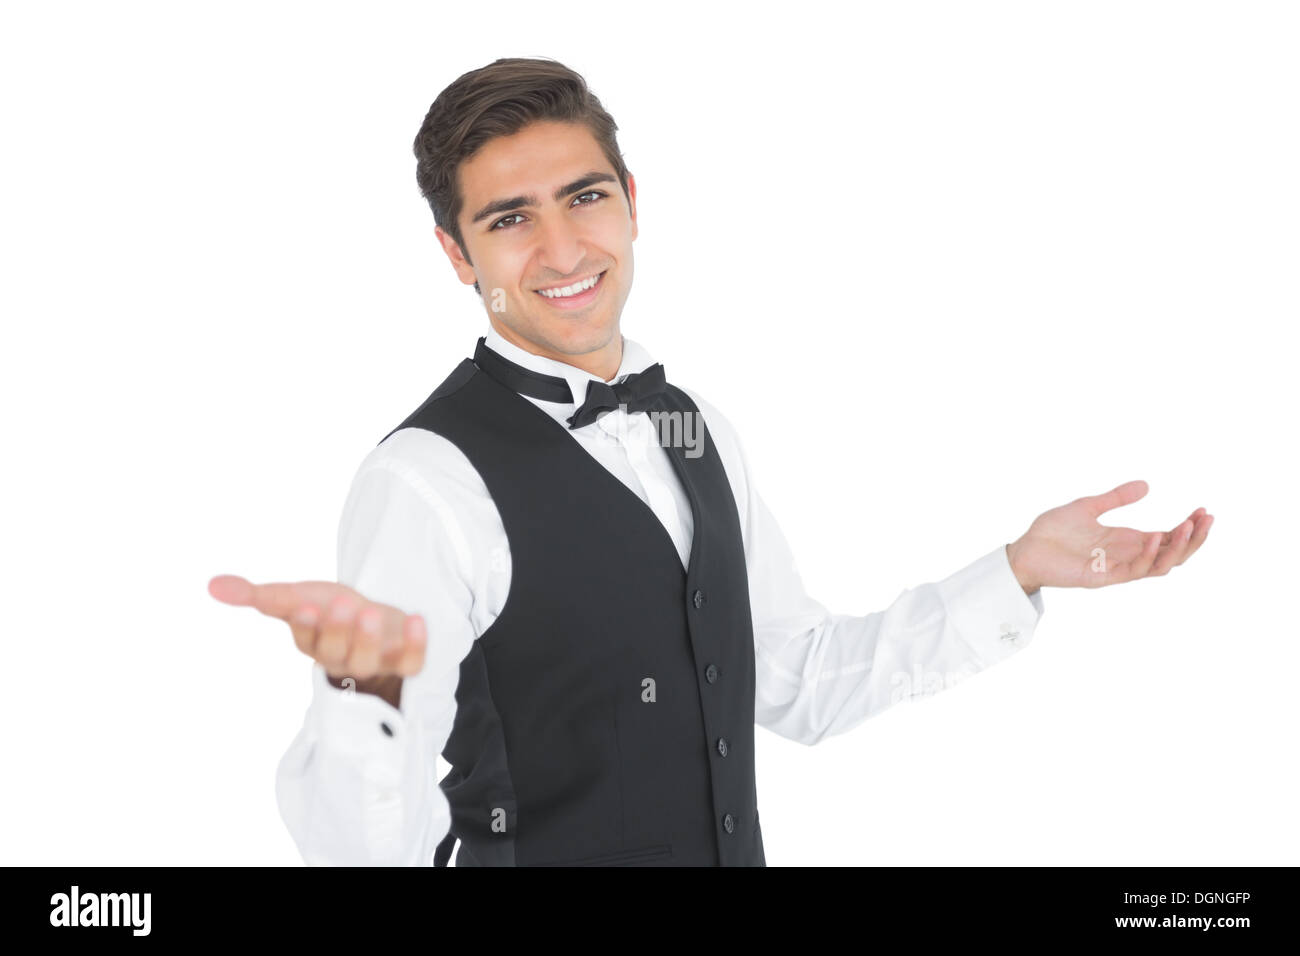 Handsome young waiter making a certain gesture Stock Photo